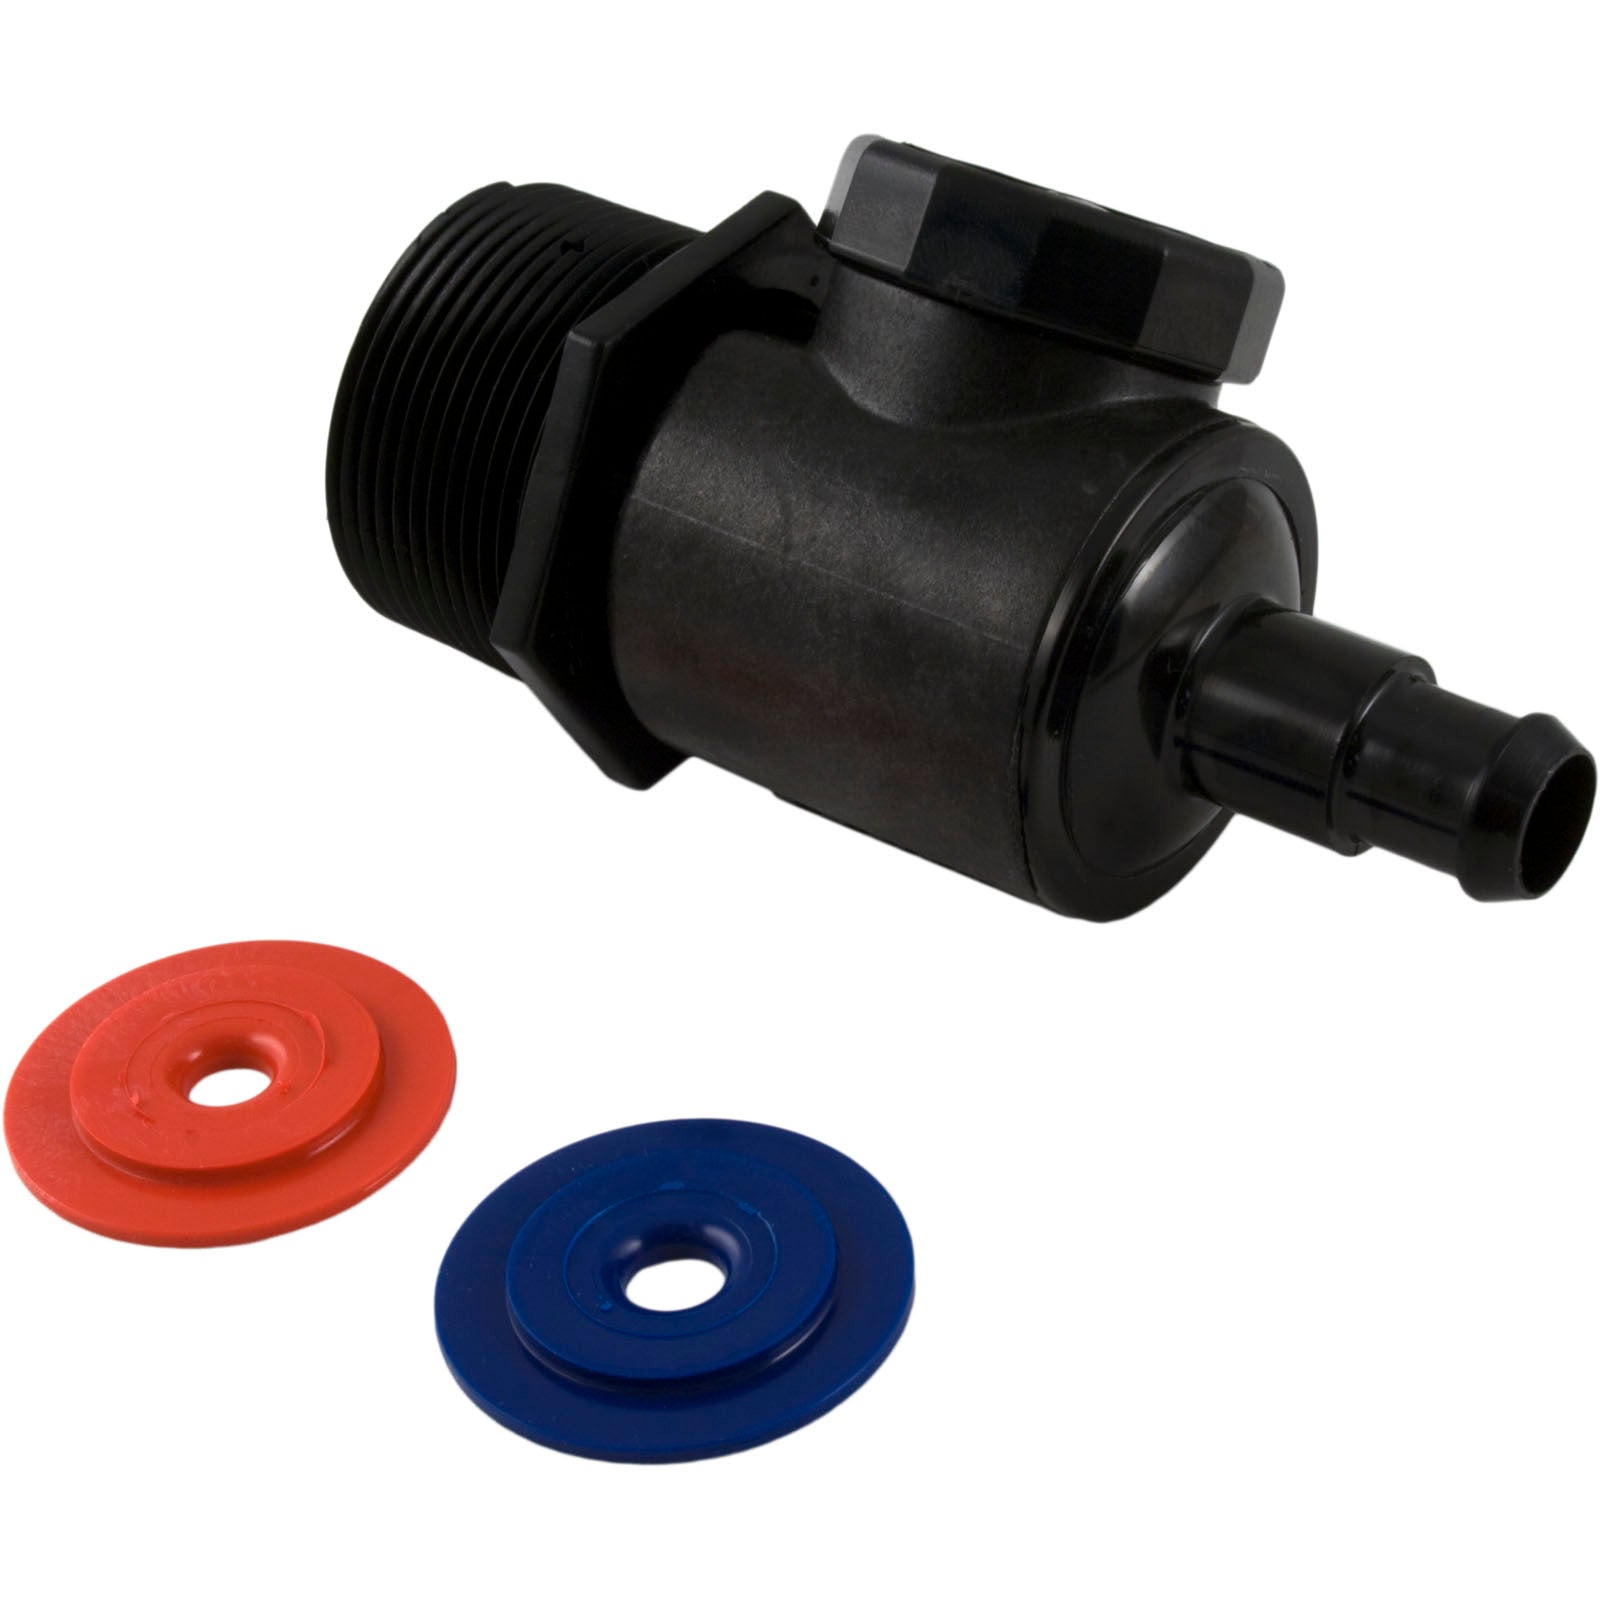 Polaris/Zodiac 9-100-9005 Black UWF Connector Assembly for 480 PRO and 280/380 Pool Cleaners